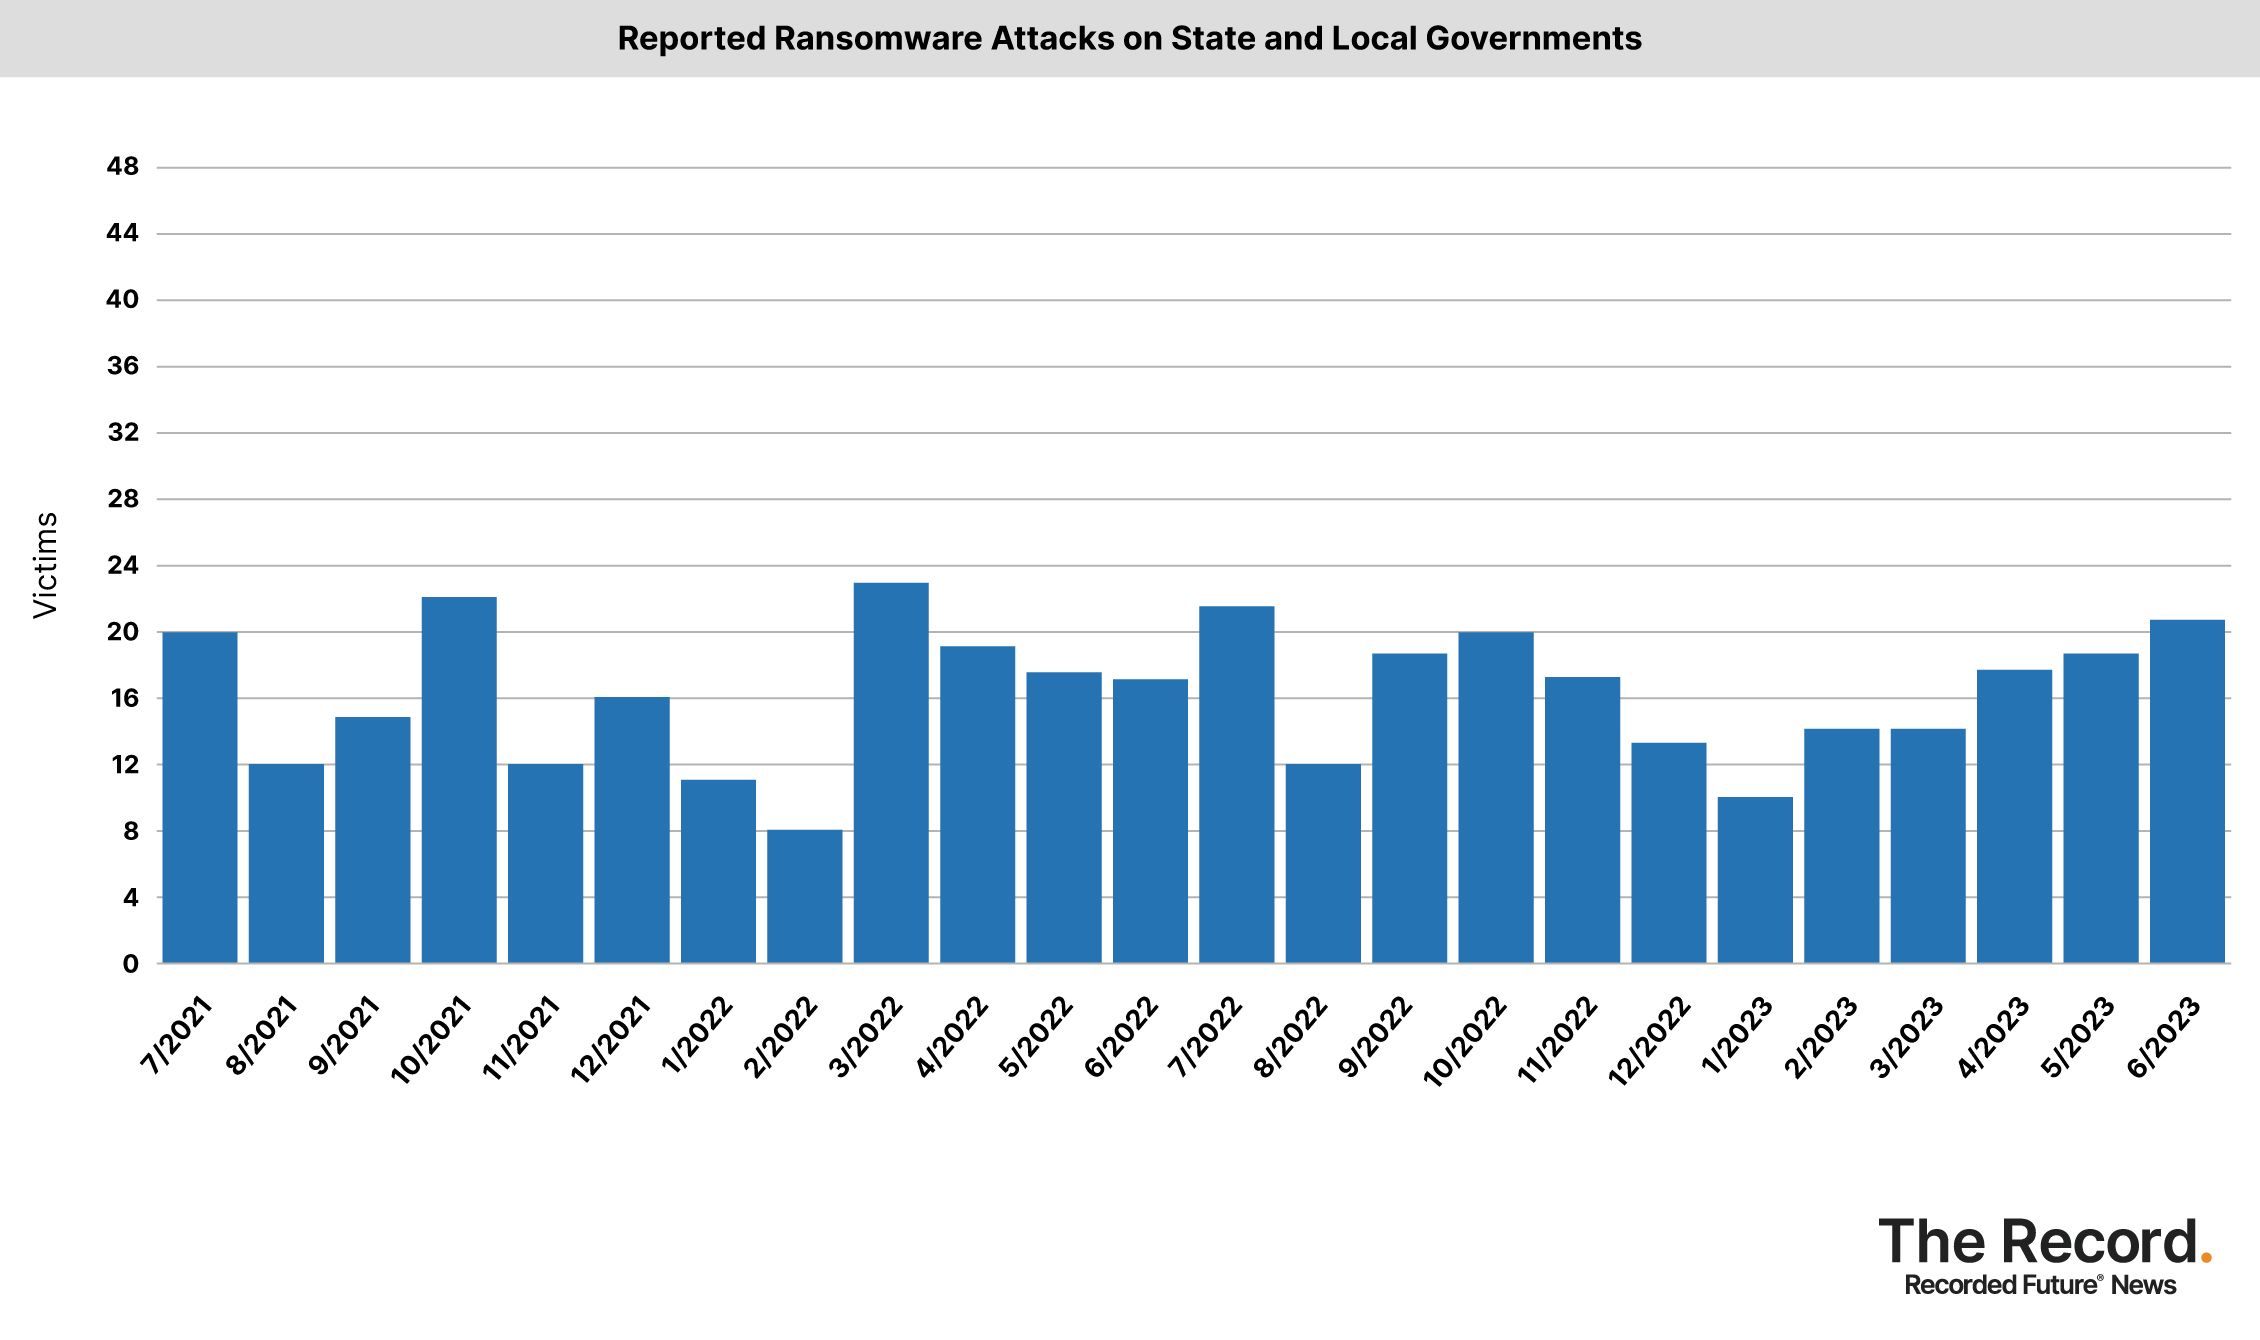 2023_0706 - Ransomware Tracker - Reported Ransomware Attacks on State and Local Governments.jpg